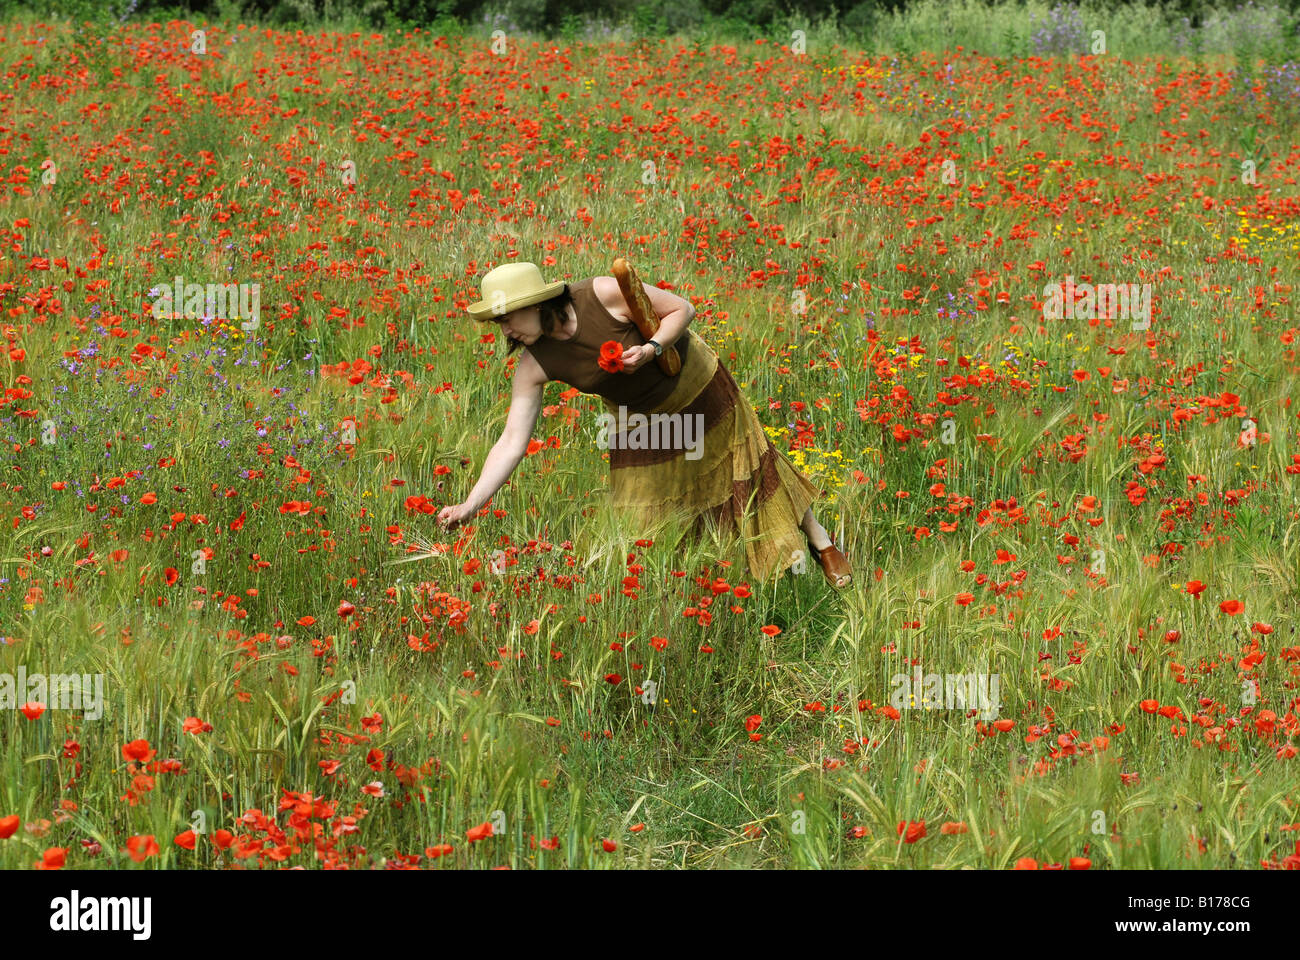 Lady walking through field of wild flowers carrying a baguette Stock Photo